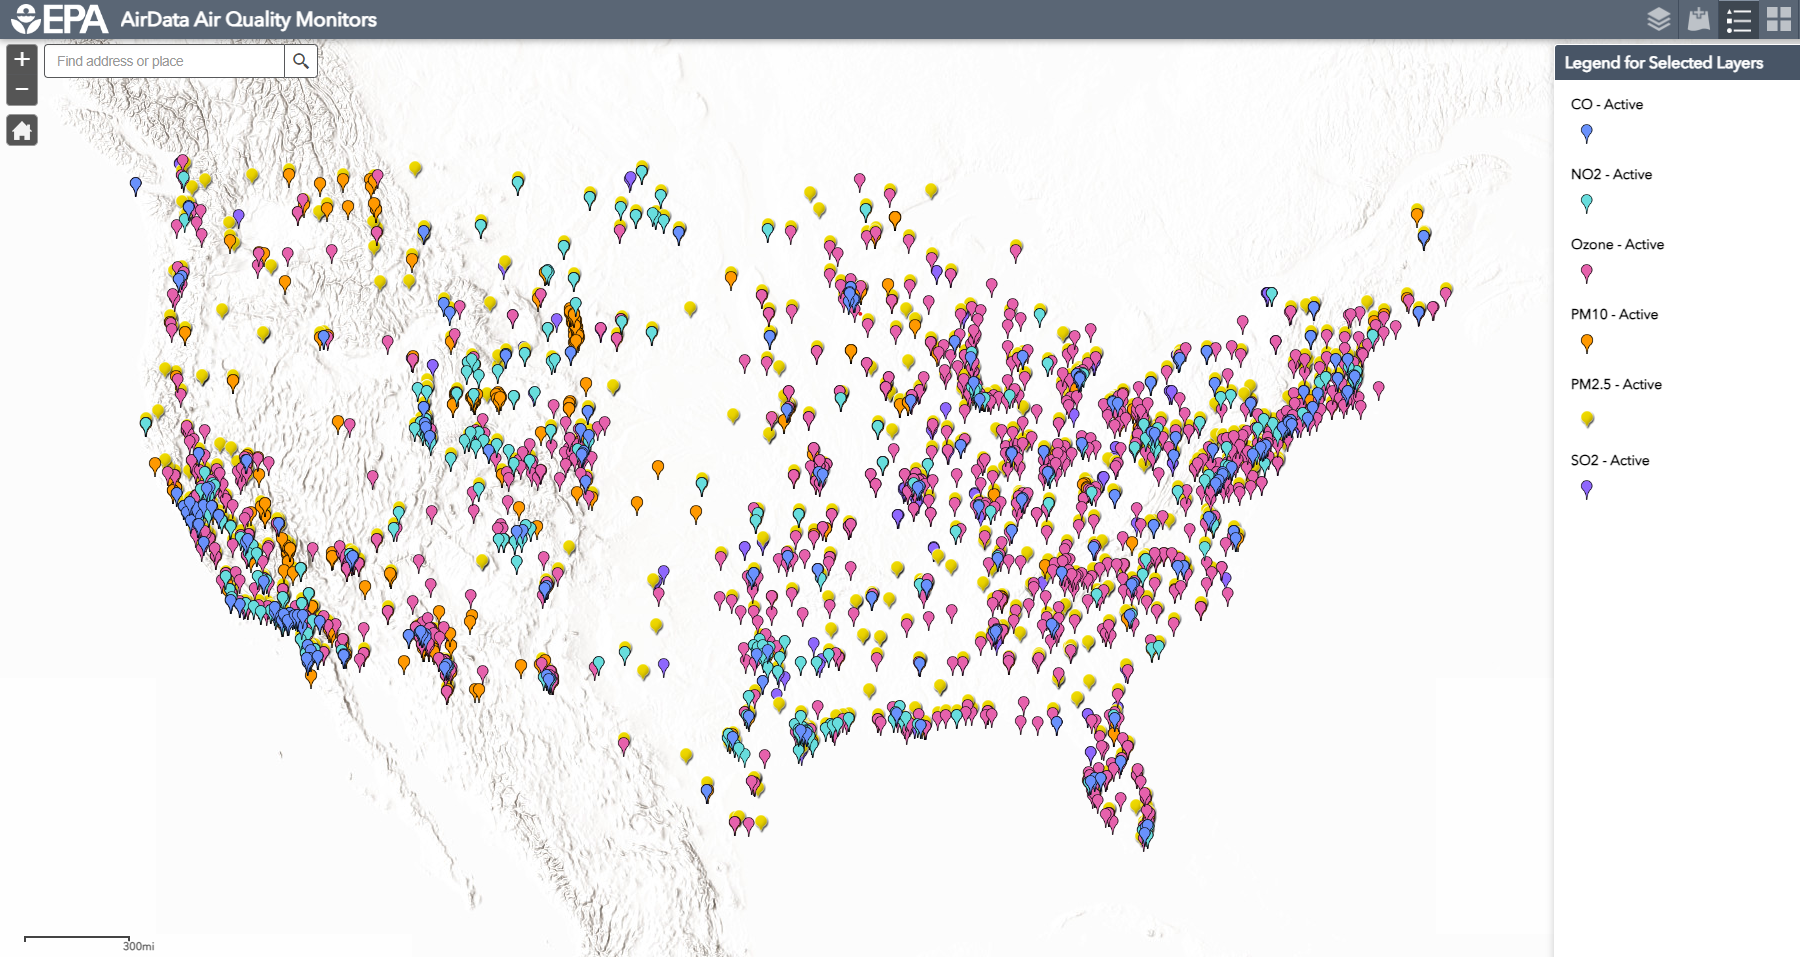 Map of the US showing Location of Air Quality Monitors for Criteria Pollutants for purpose of wildfire pollution data